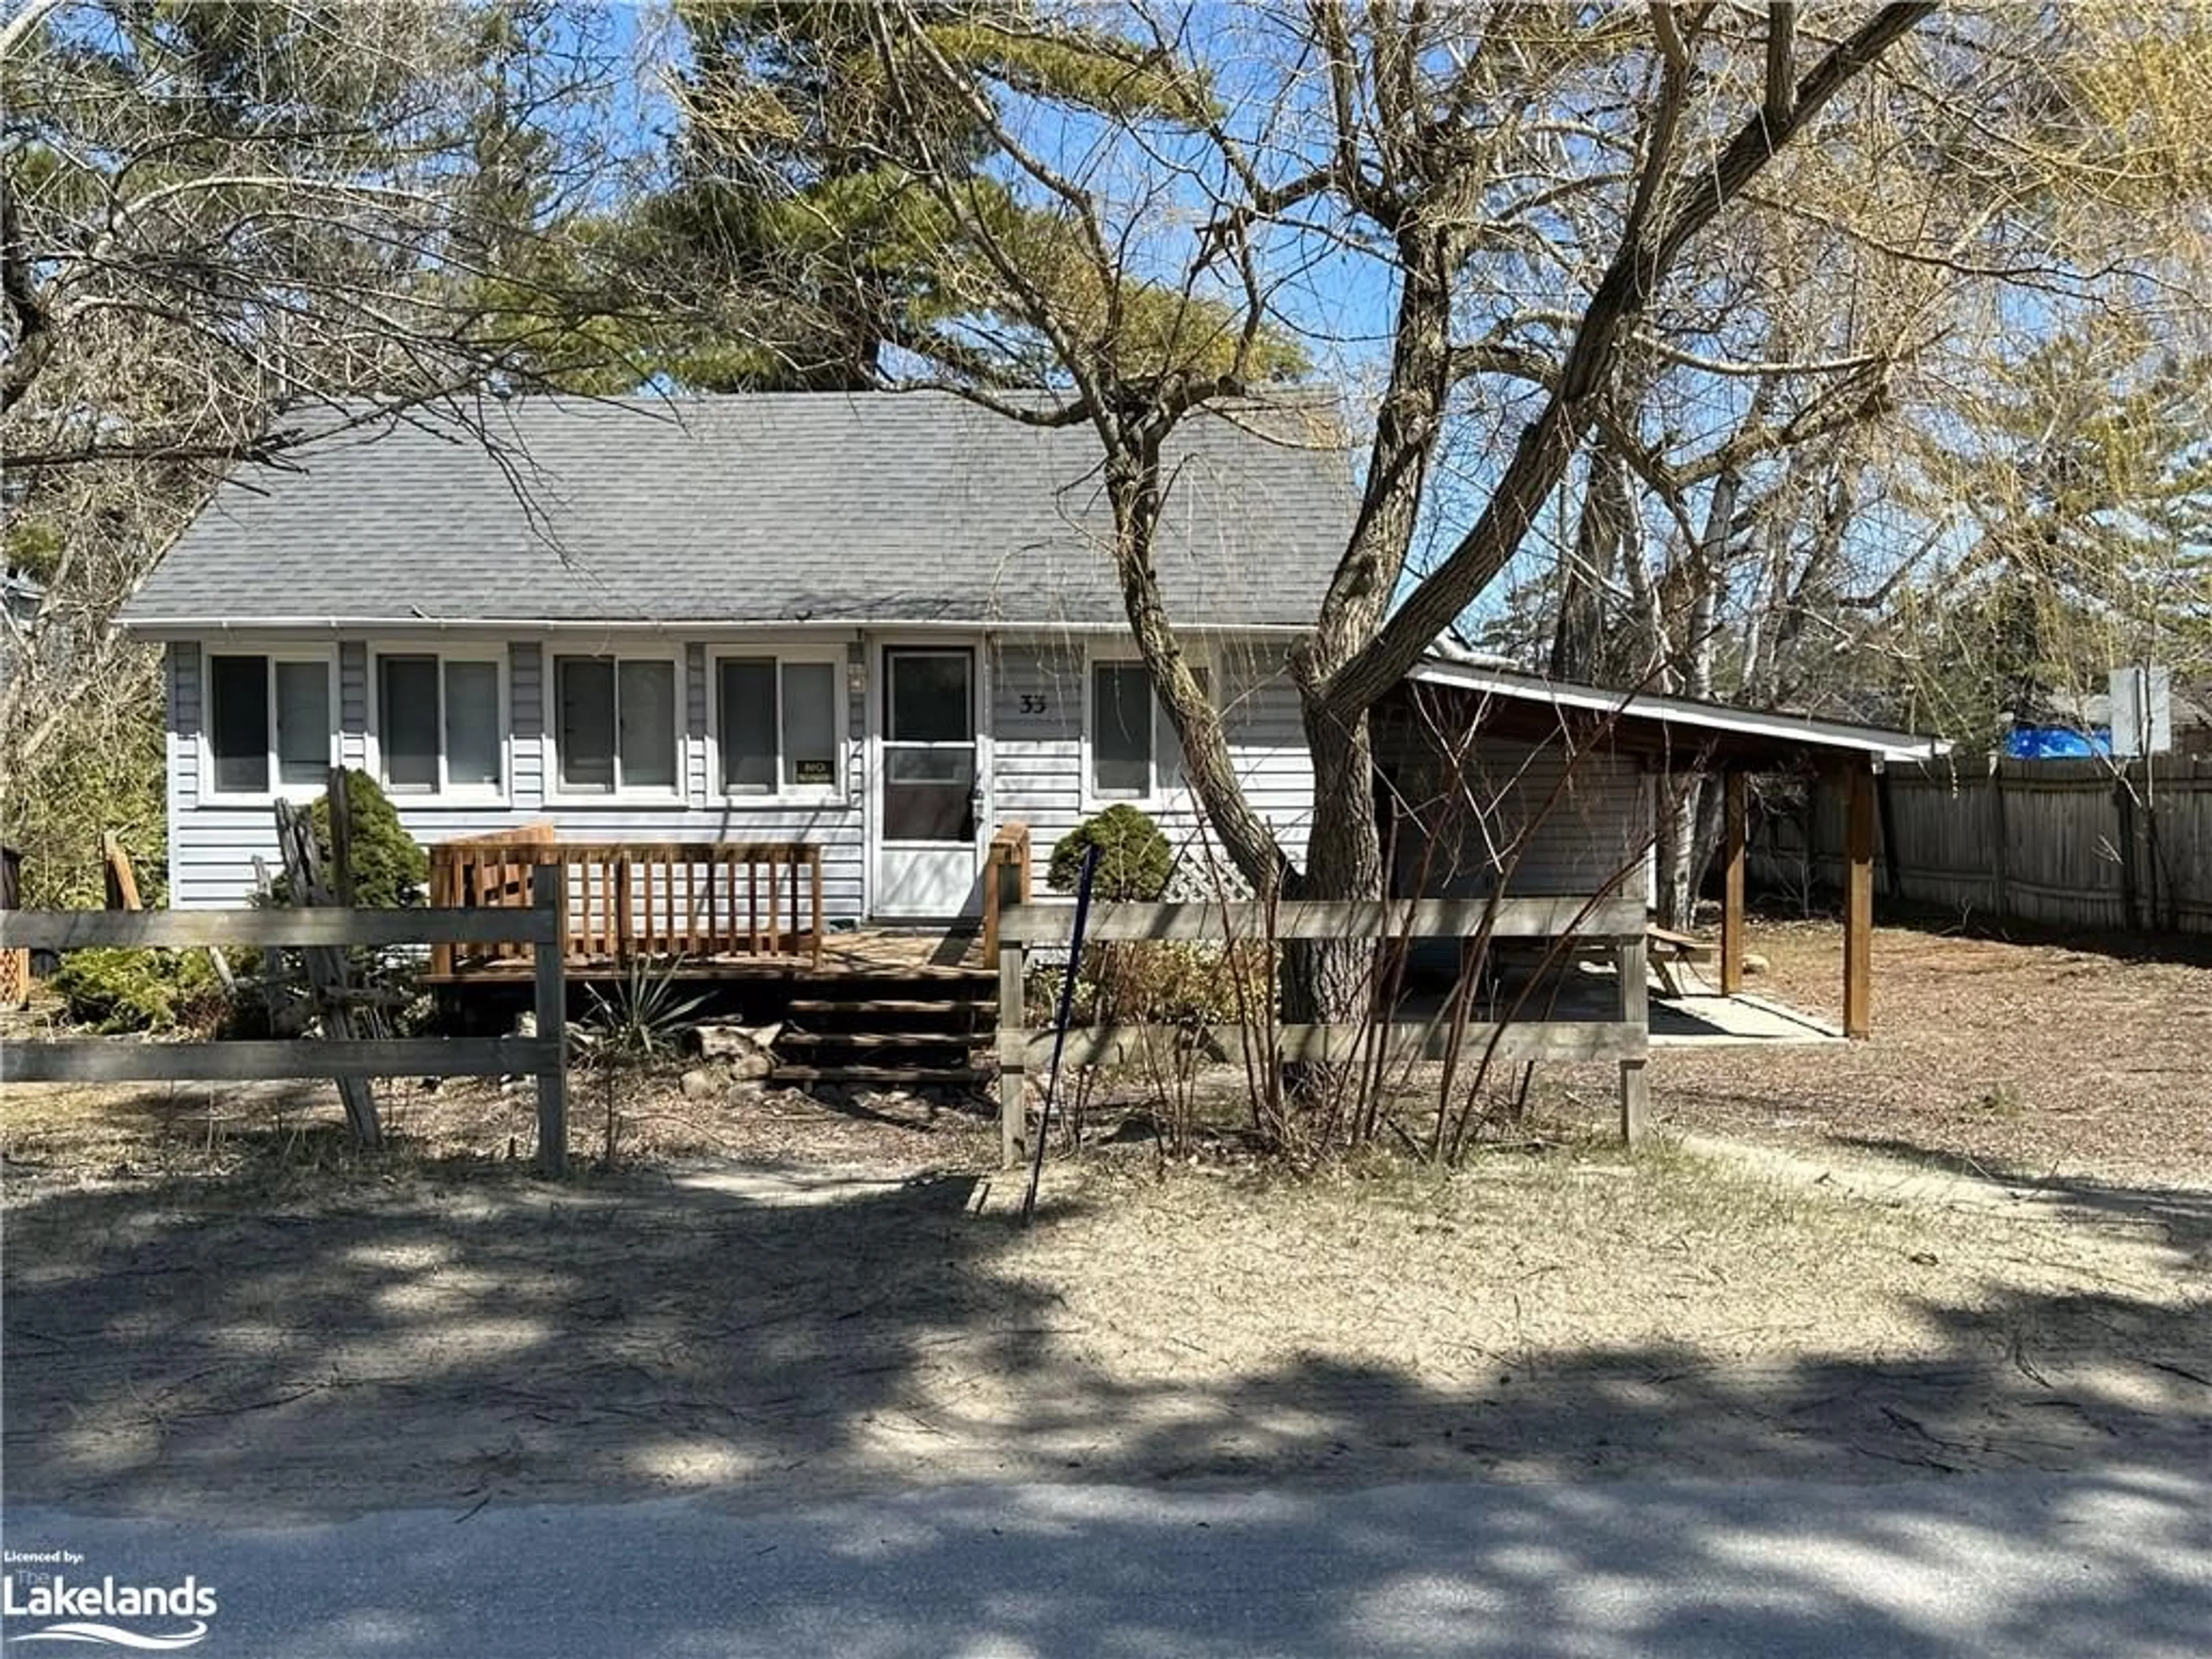 Cottage for 33 17th St, Wasaga Beach Ontario L9Z 2J1